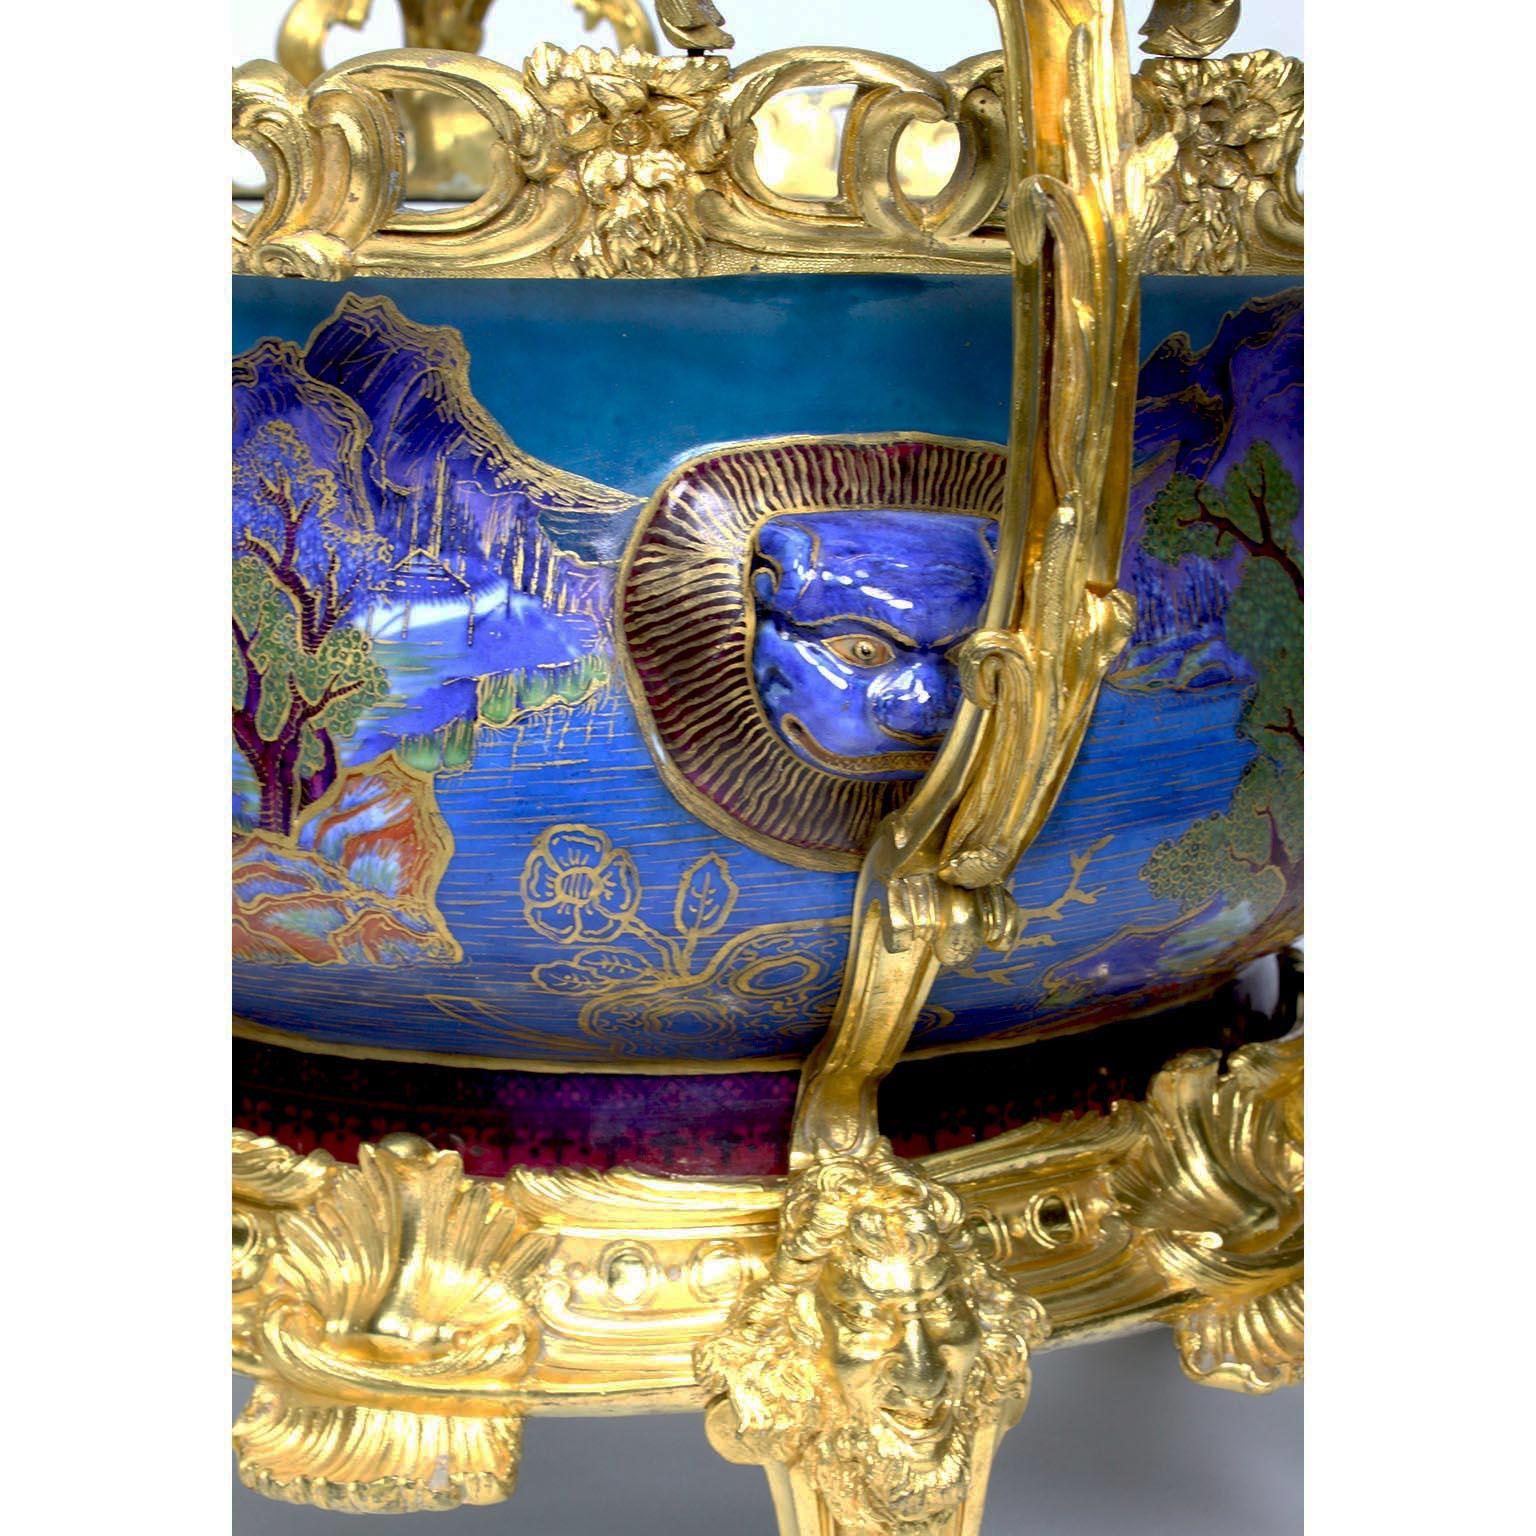 Chinese Export Famille Verte Porcelain & French Ormolu Chinoiserie Centerpiece For Sale 7